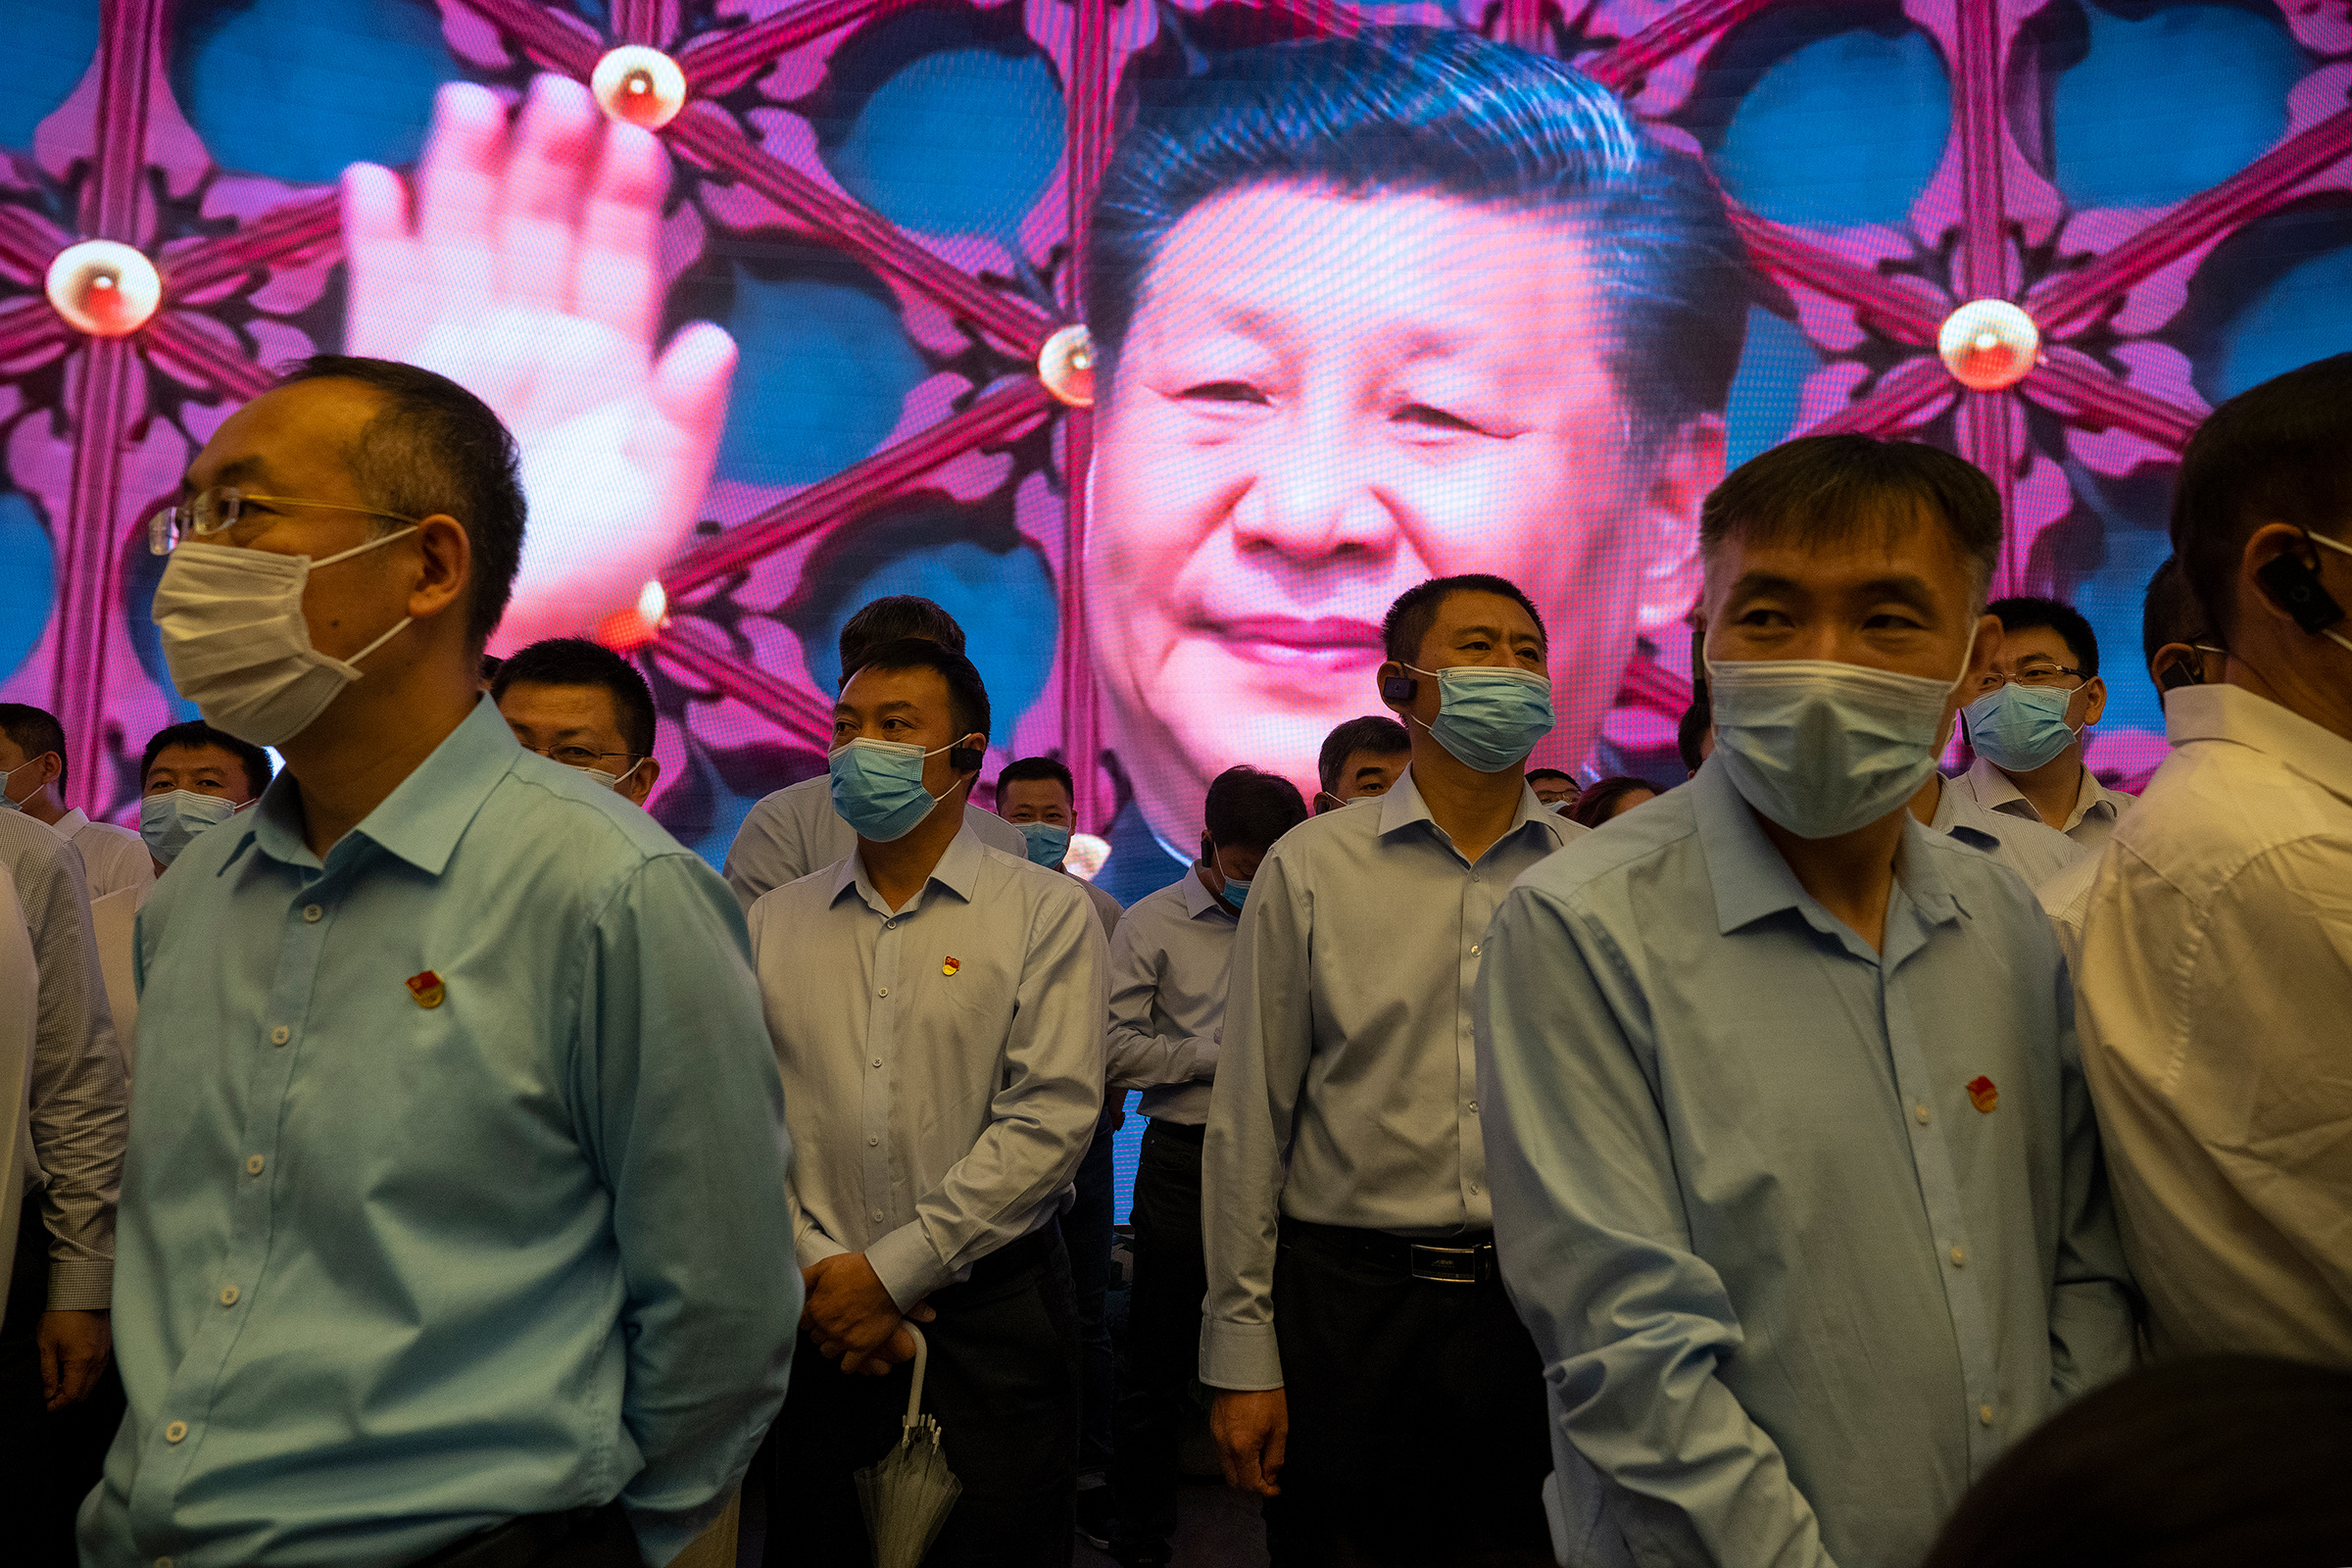 Visitors stand inside the Memorial of the FirstNational Congress of the Communist Party of China, as Xi is seen on the screen in the back, on June 17, 2021 in Shanghai, China. (Andrea Verdelli—Getty Images)